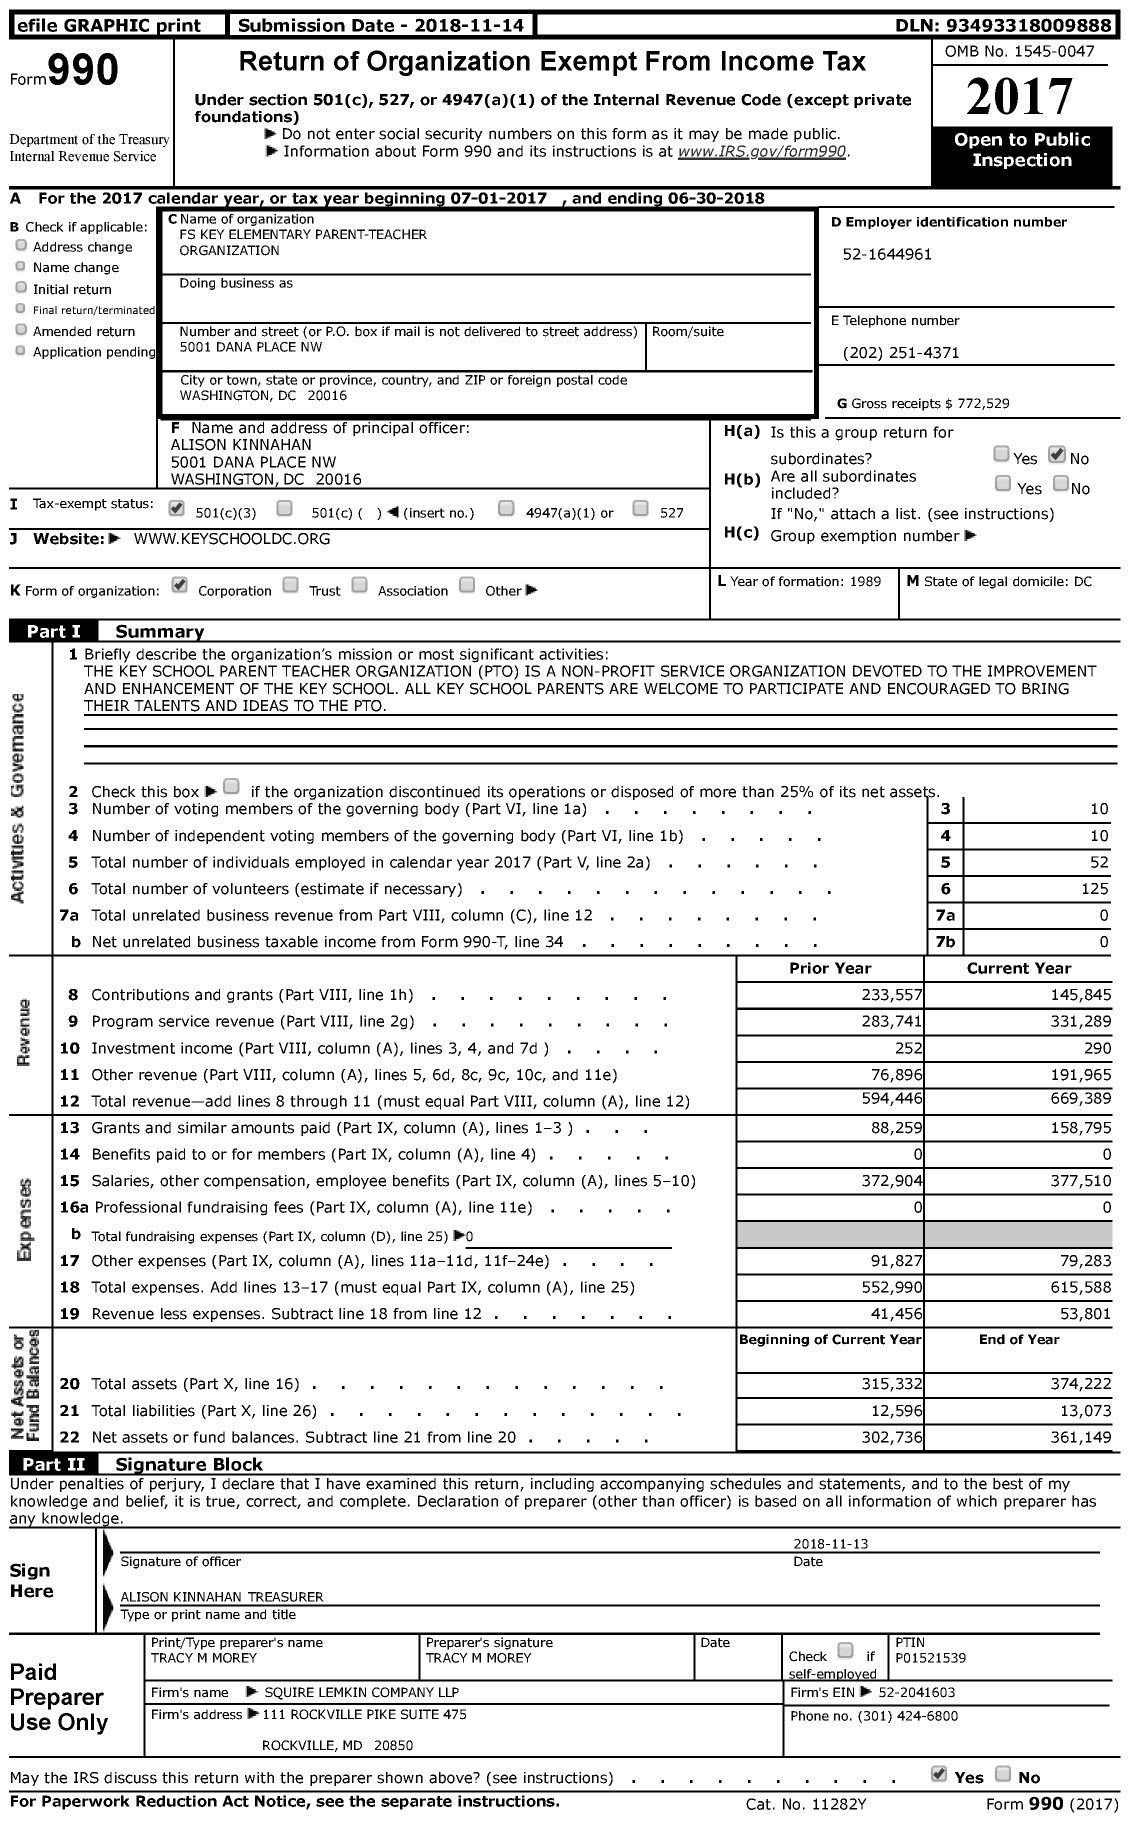 Image of first page of 2017 Form 990 for FS Key Elementary Parent-Teacher Organization